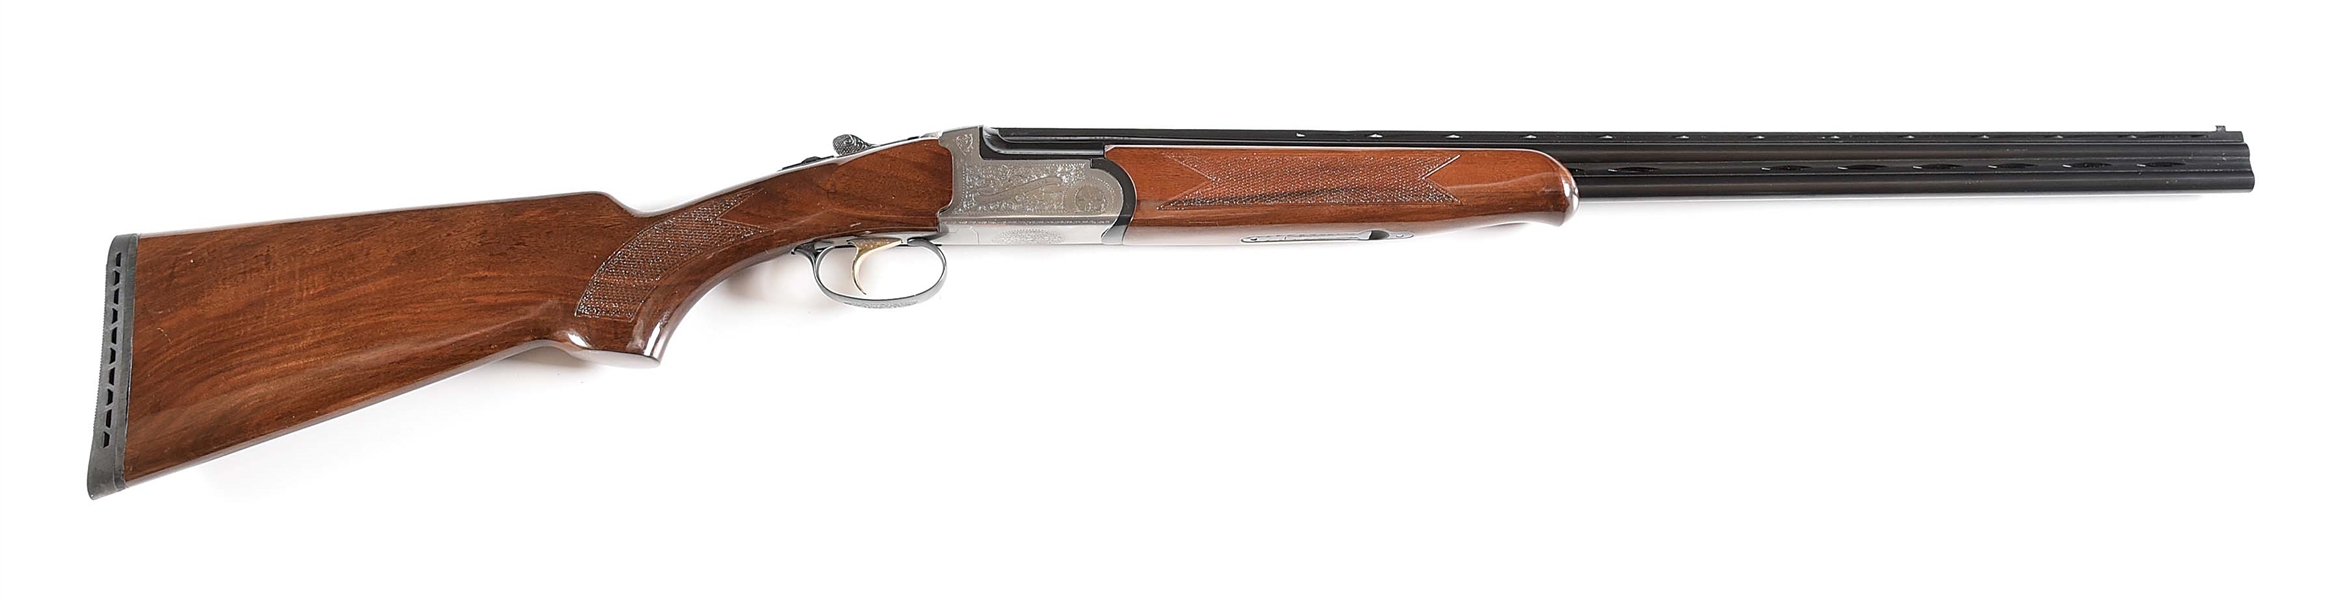 (M) CHARLES DALY LUXE .410 GAUGE OVER UNDER SHOTGUN WITH BOX.